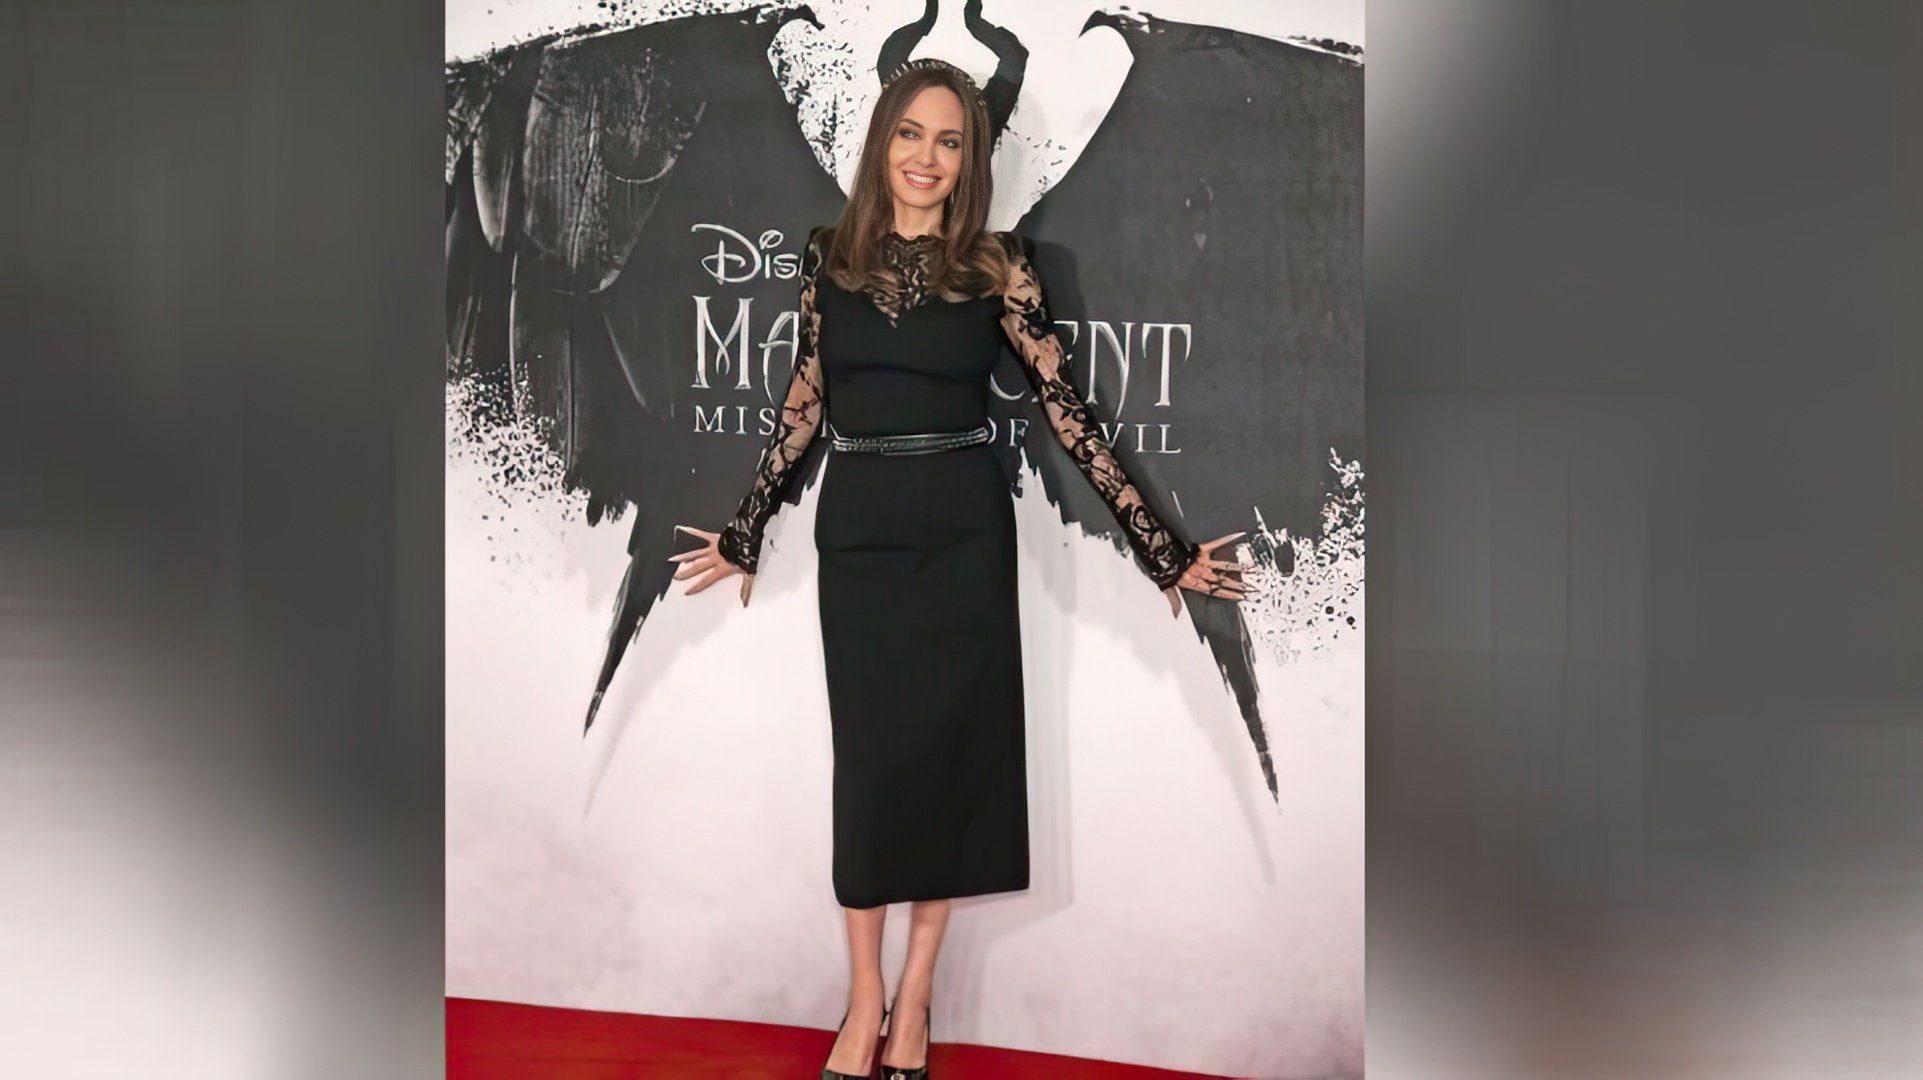 Premiere of 'Maleficent 2'